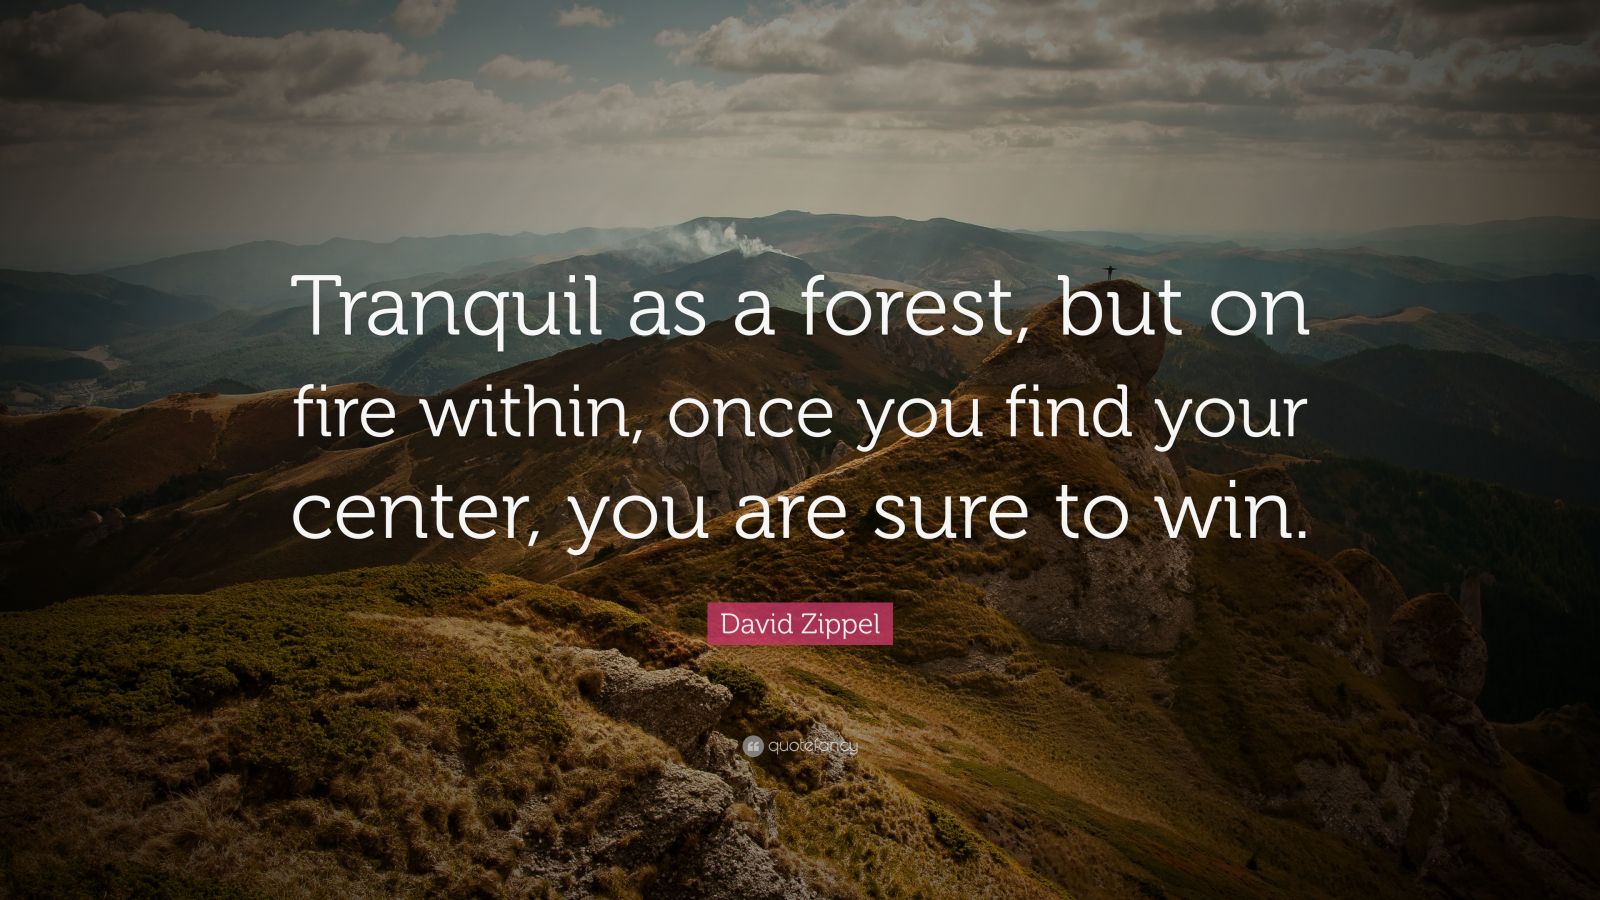 David Zippel Quote “Tranquil as a forest, but on fire